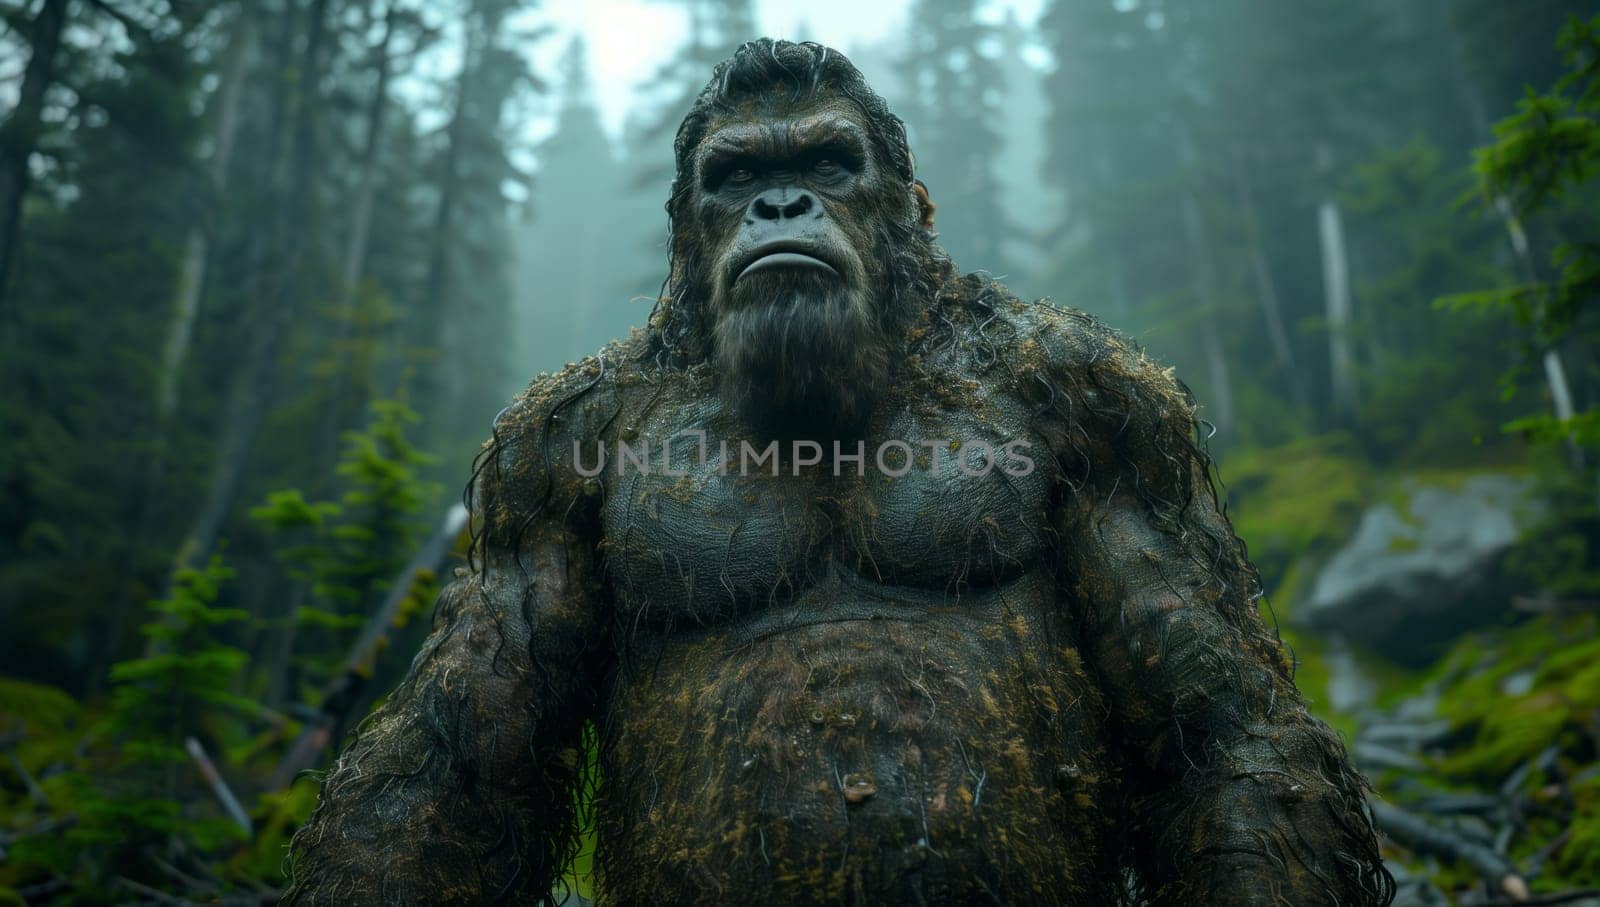 A fictional character, a large gorilla, stands in the darkness of the jungle. Surrounding it are terrestrial plants, trees, and grass in the forest landscape